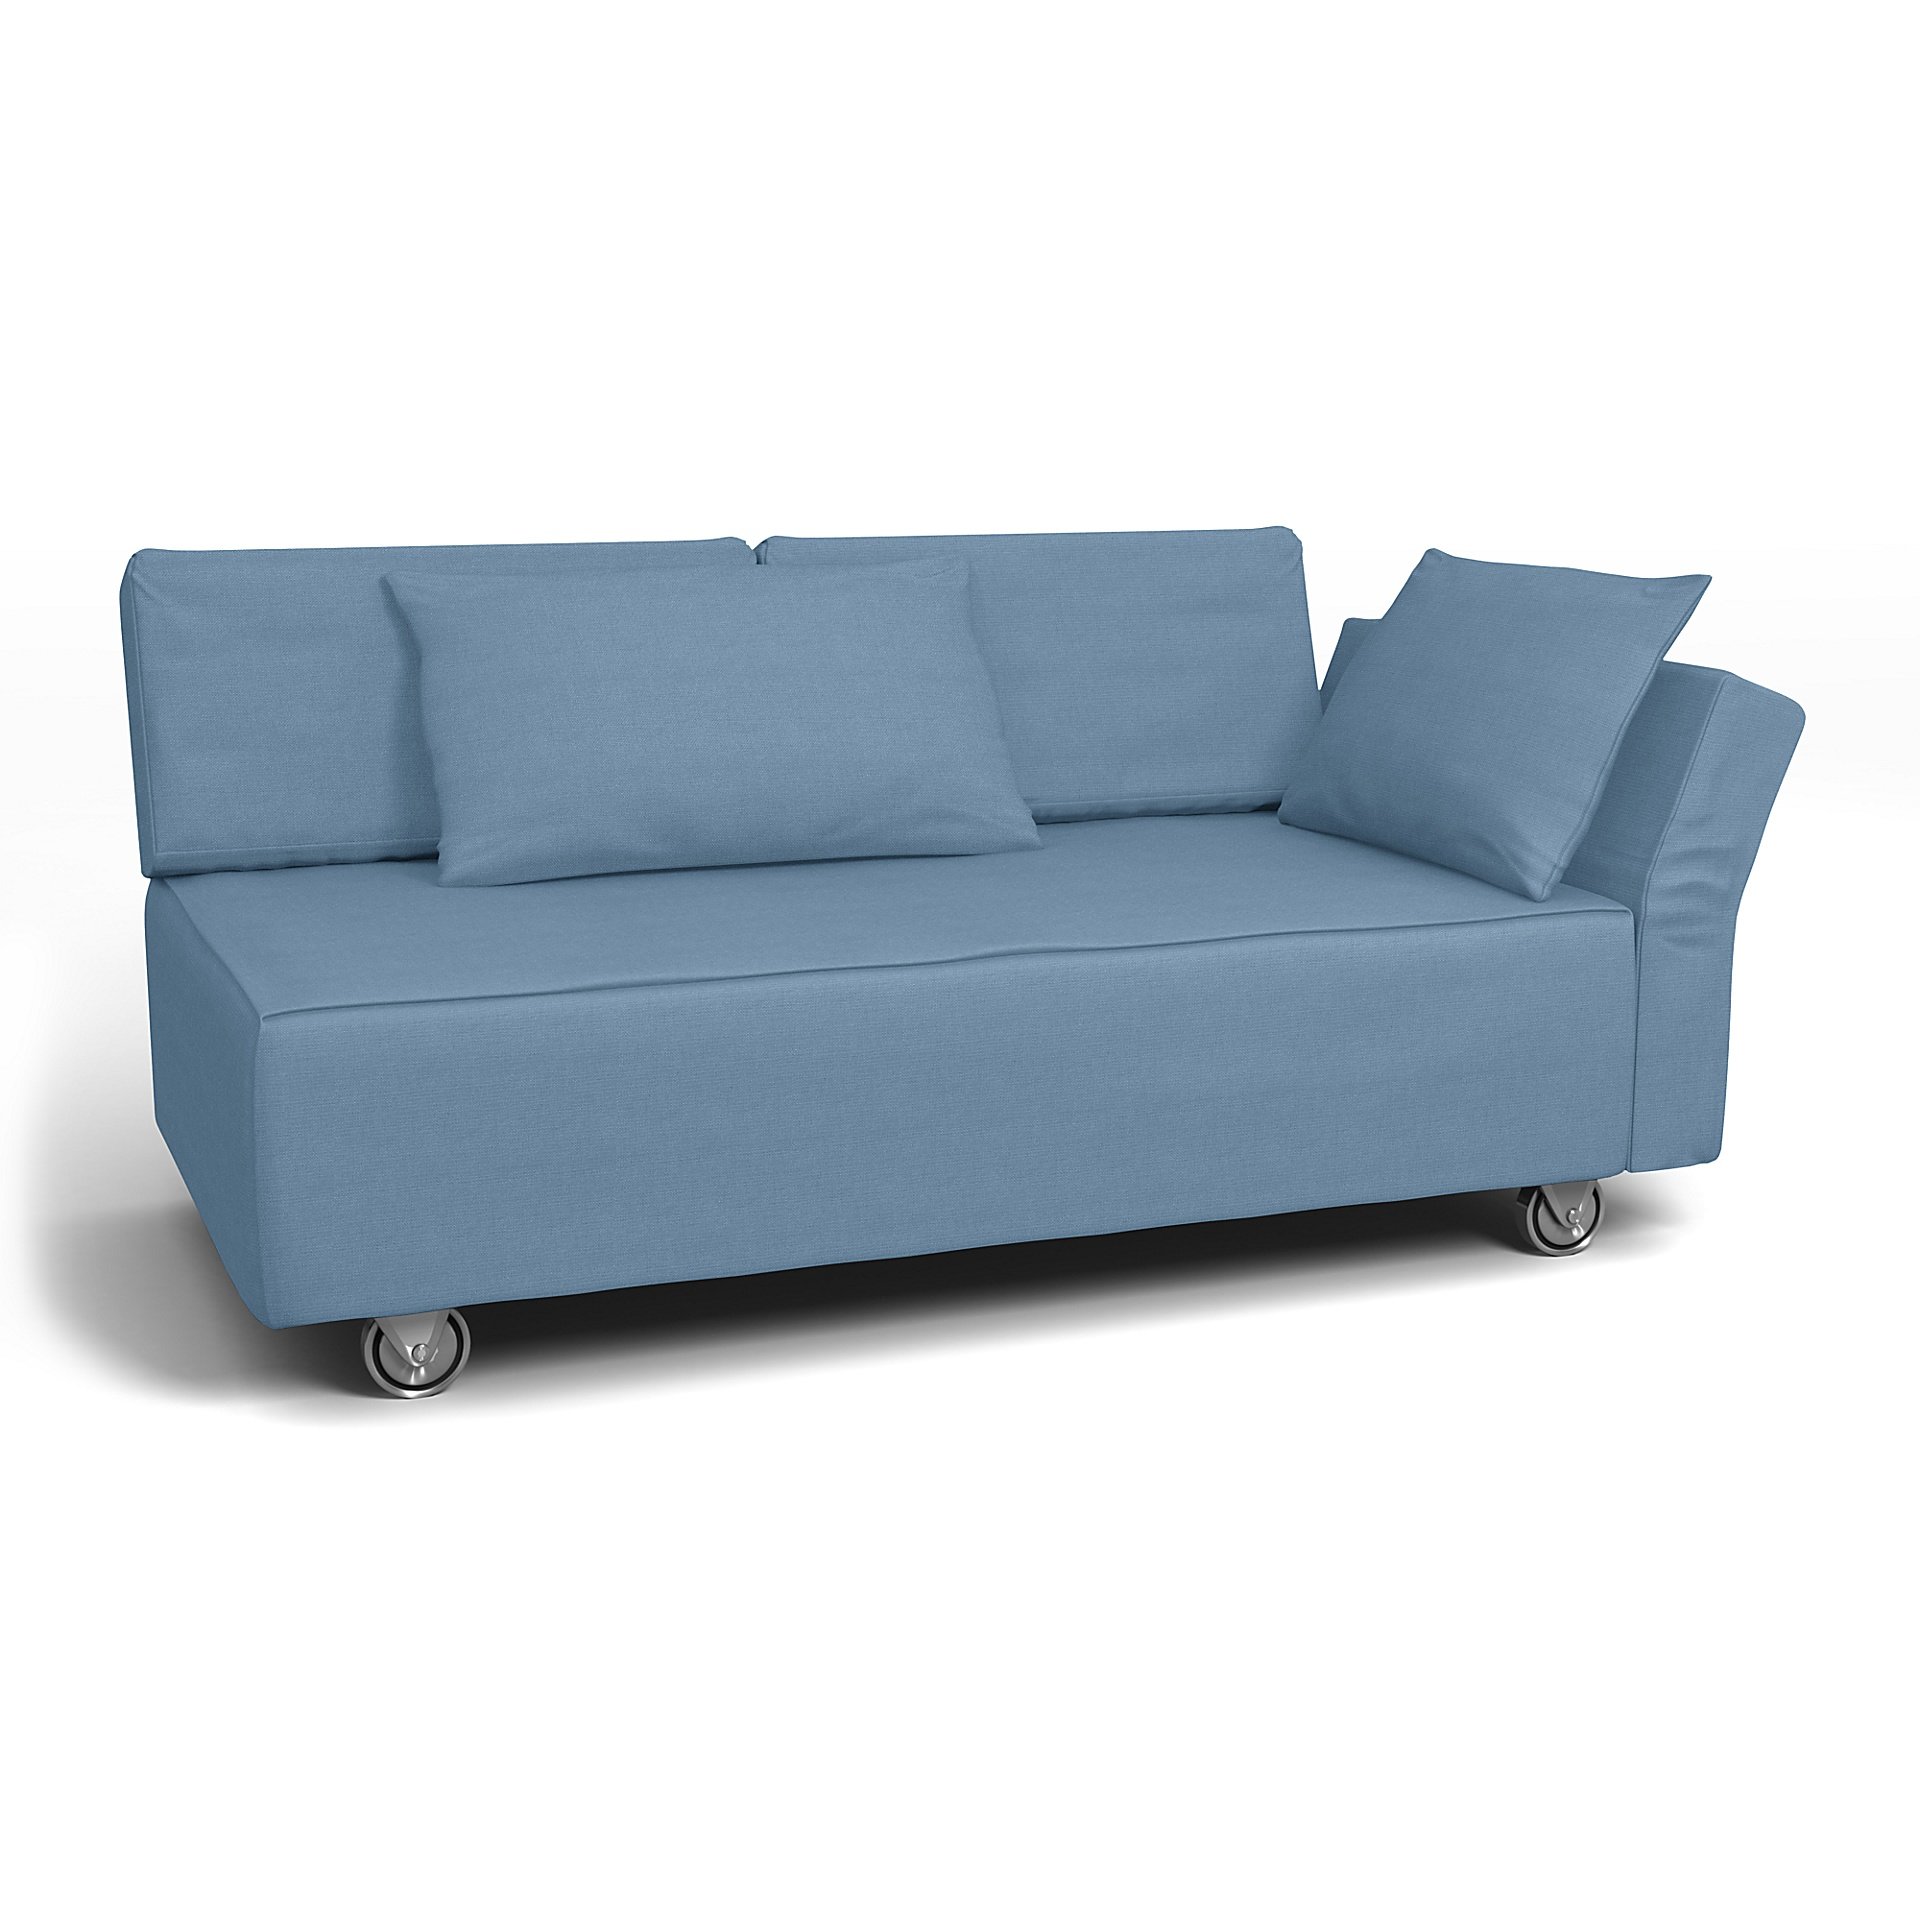 IKEA - Falsterbo 2 Seat Sofa with Right Arm Cover, Vintage Blue, Linen - Bemz